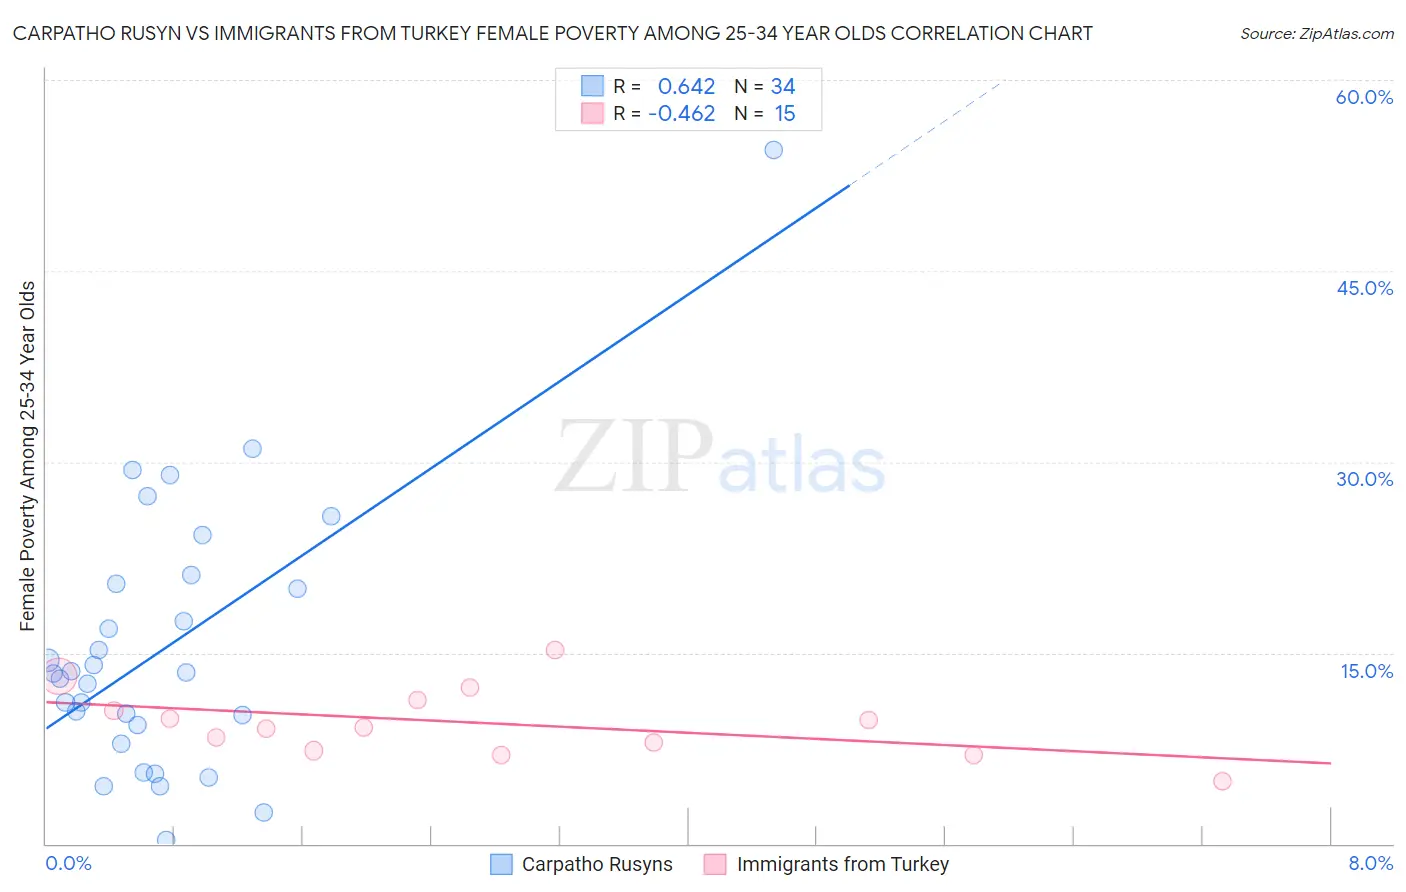 Carpatho Rusyn vs Immigrants from Turkey Female Poverty Among 25-34 Year Olds